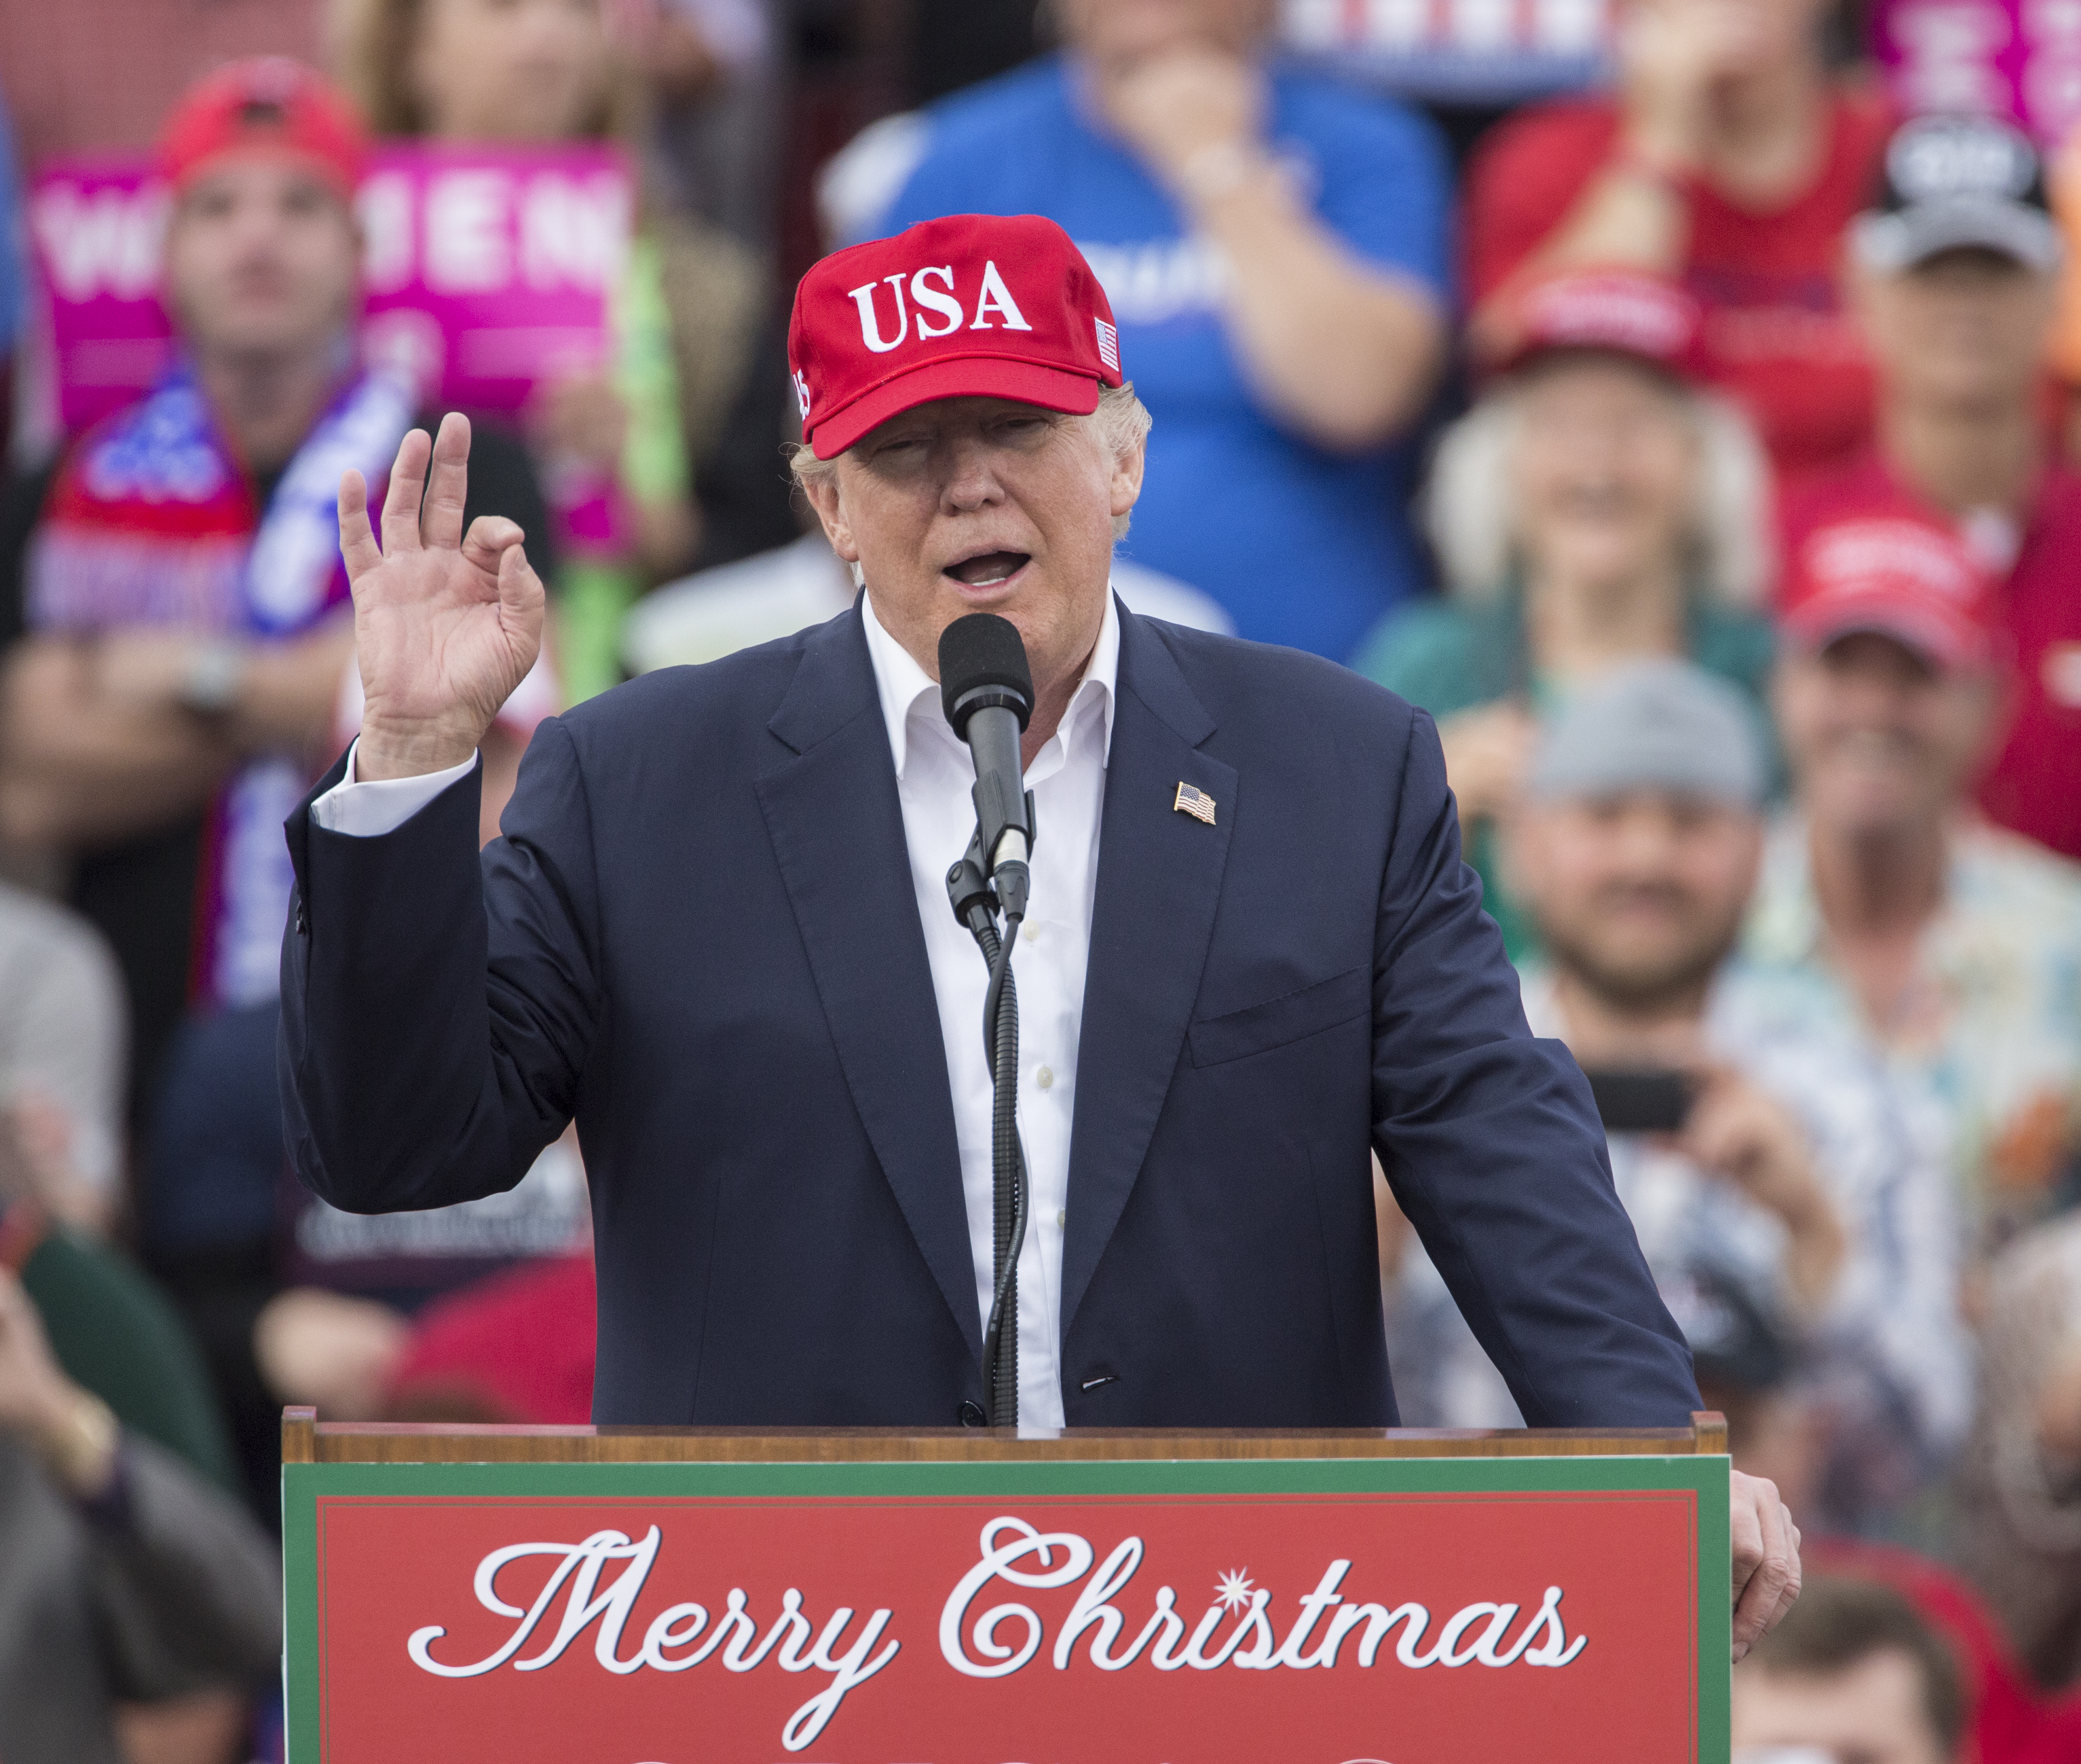 President-elect Donald Trump speaks during a thank you rally in Ladd-Peebles Stadium on December 17, 2016 in Mobile, Alabama. Mark Wallheiser&mdash;Getty Images (Mark Wallheiser&mdash;Getty Images)